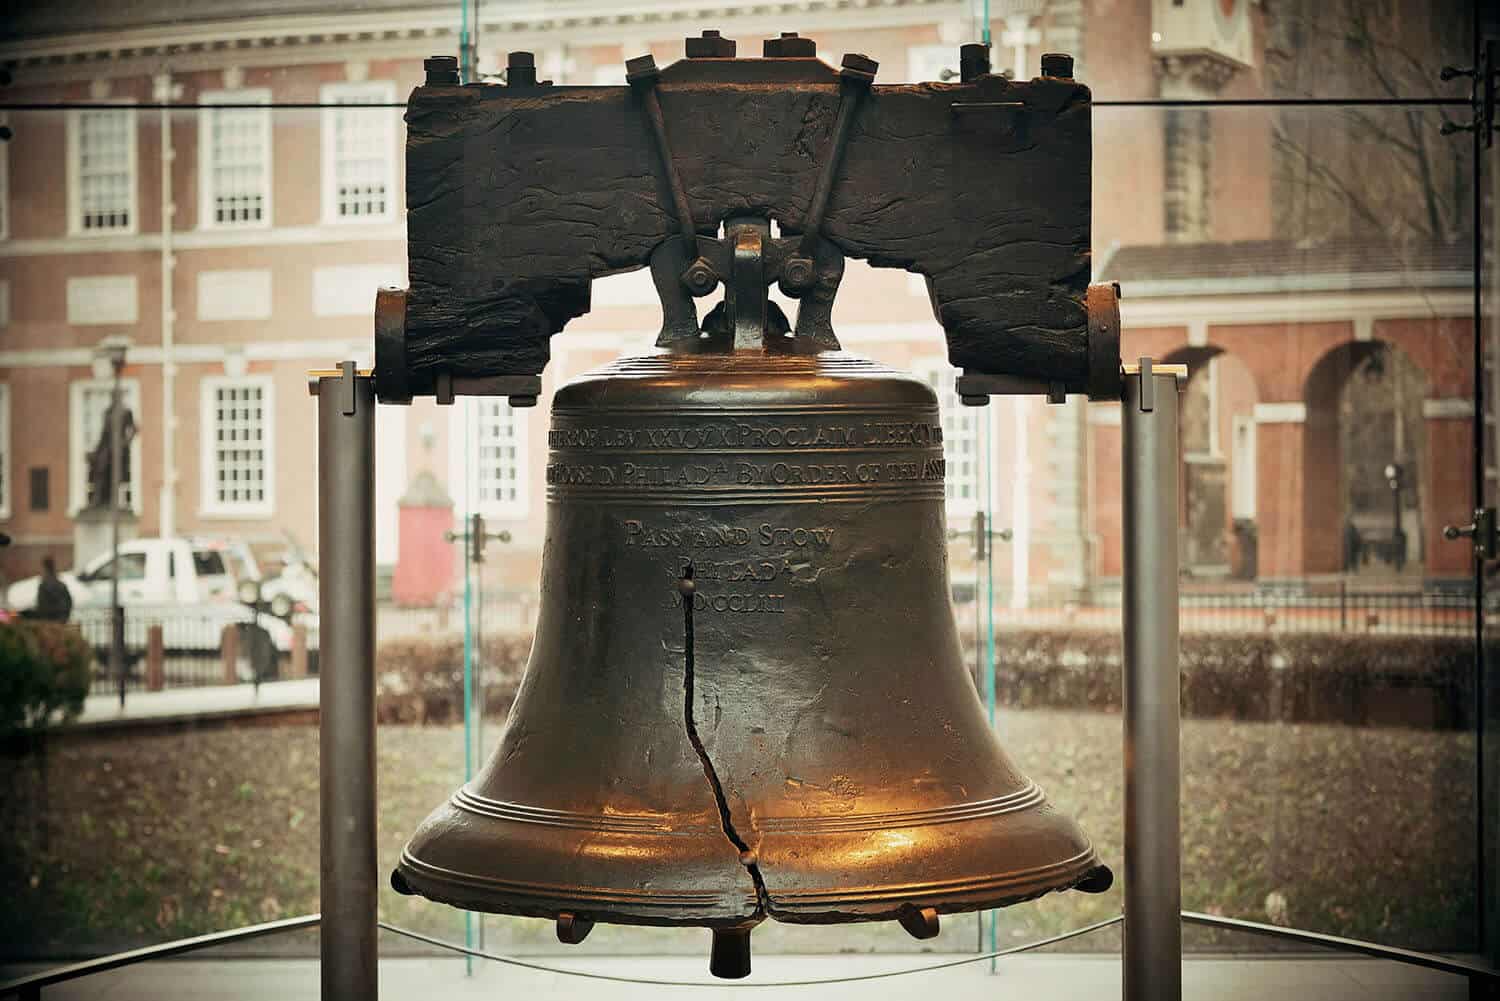 Close up of The Liberty Bell